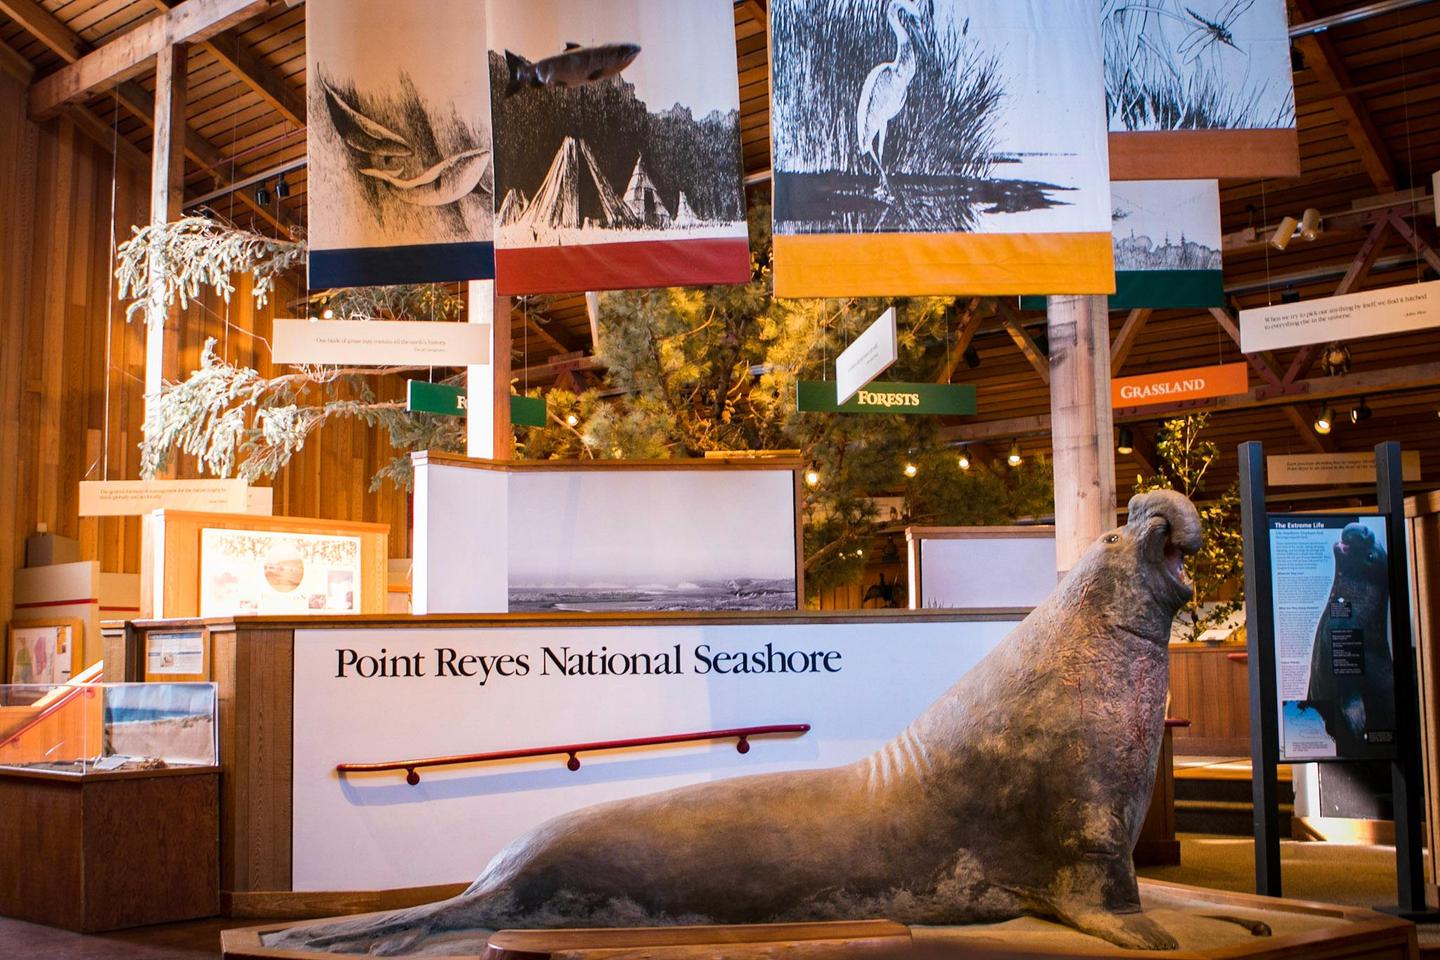 Bear Valley Visitor Center: Elephant Seal ModelOne of the first things visitors notice upon entering the Bear Valley Visitor Center is a full-size model of a bull elephant seal.